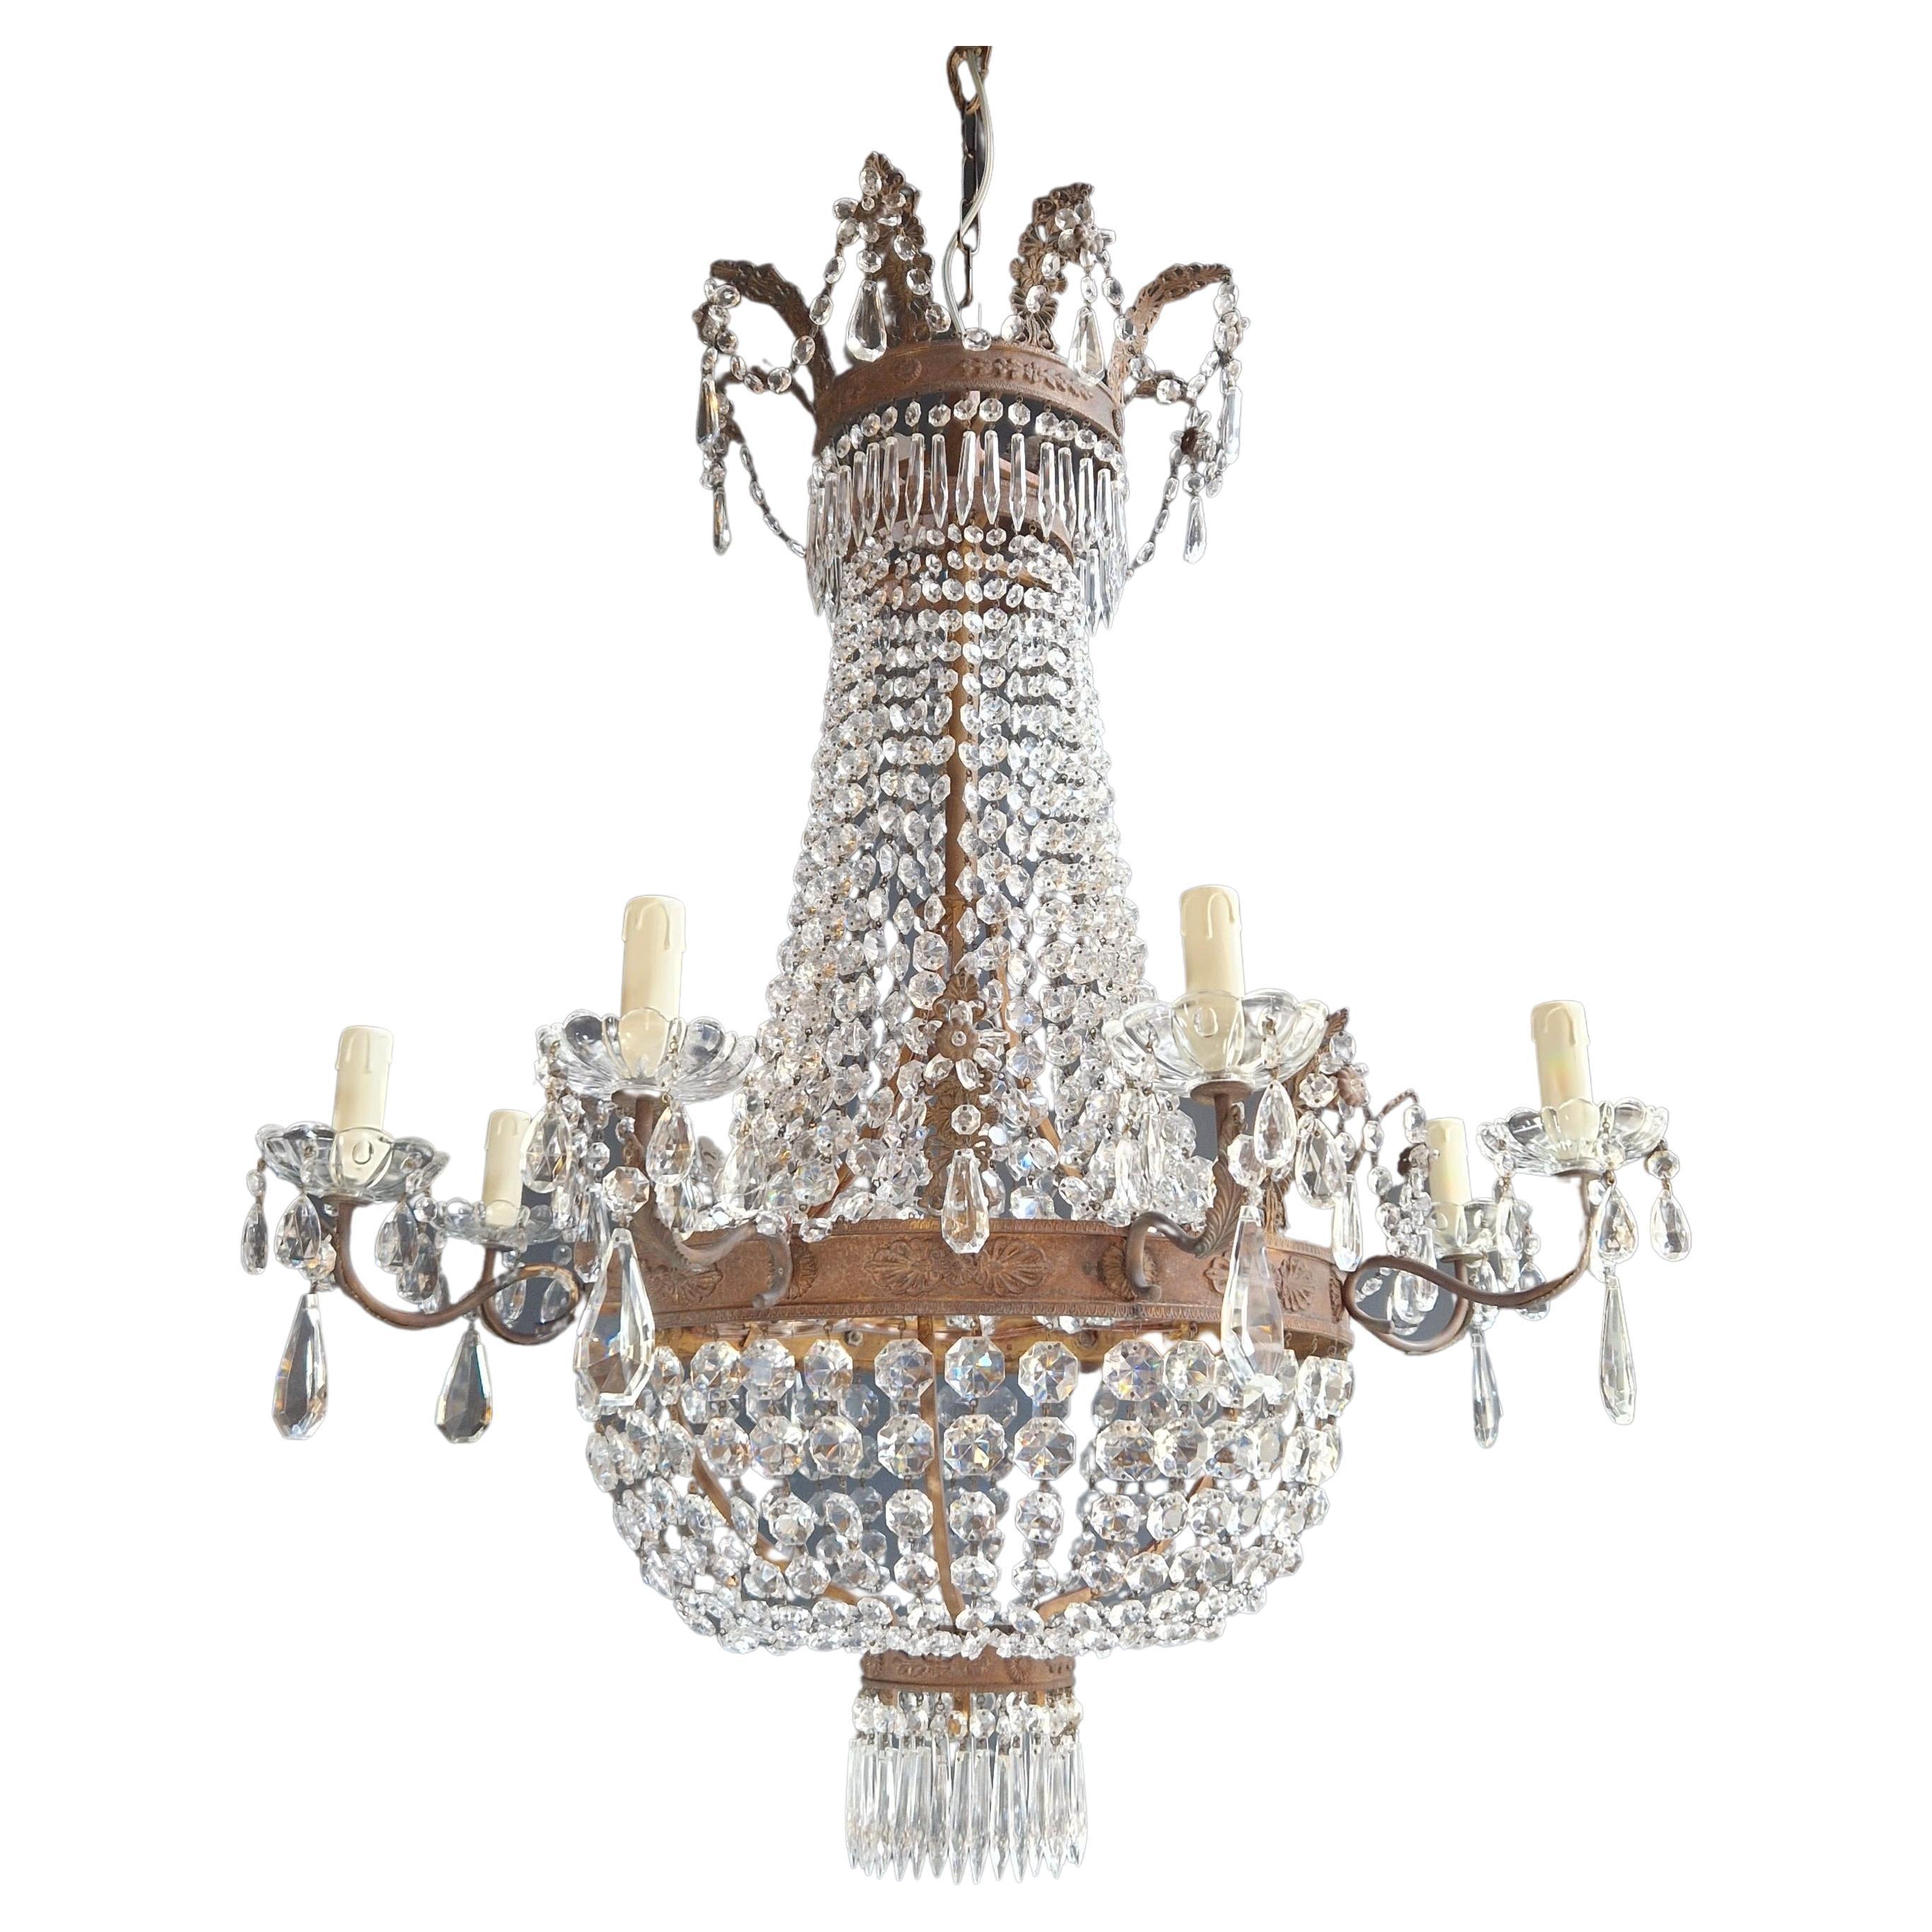 Empire Brass Chandelier Crystal Lustre Ceiling Light Antique Classical